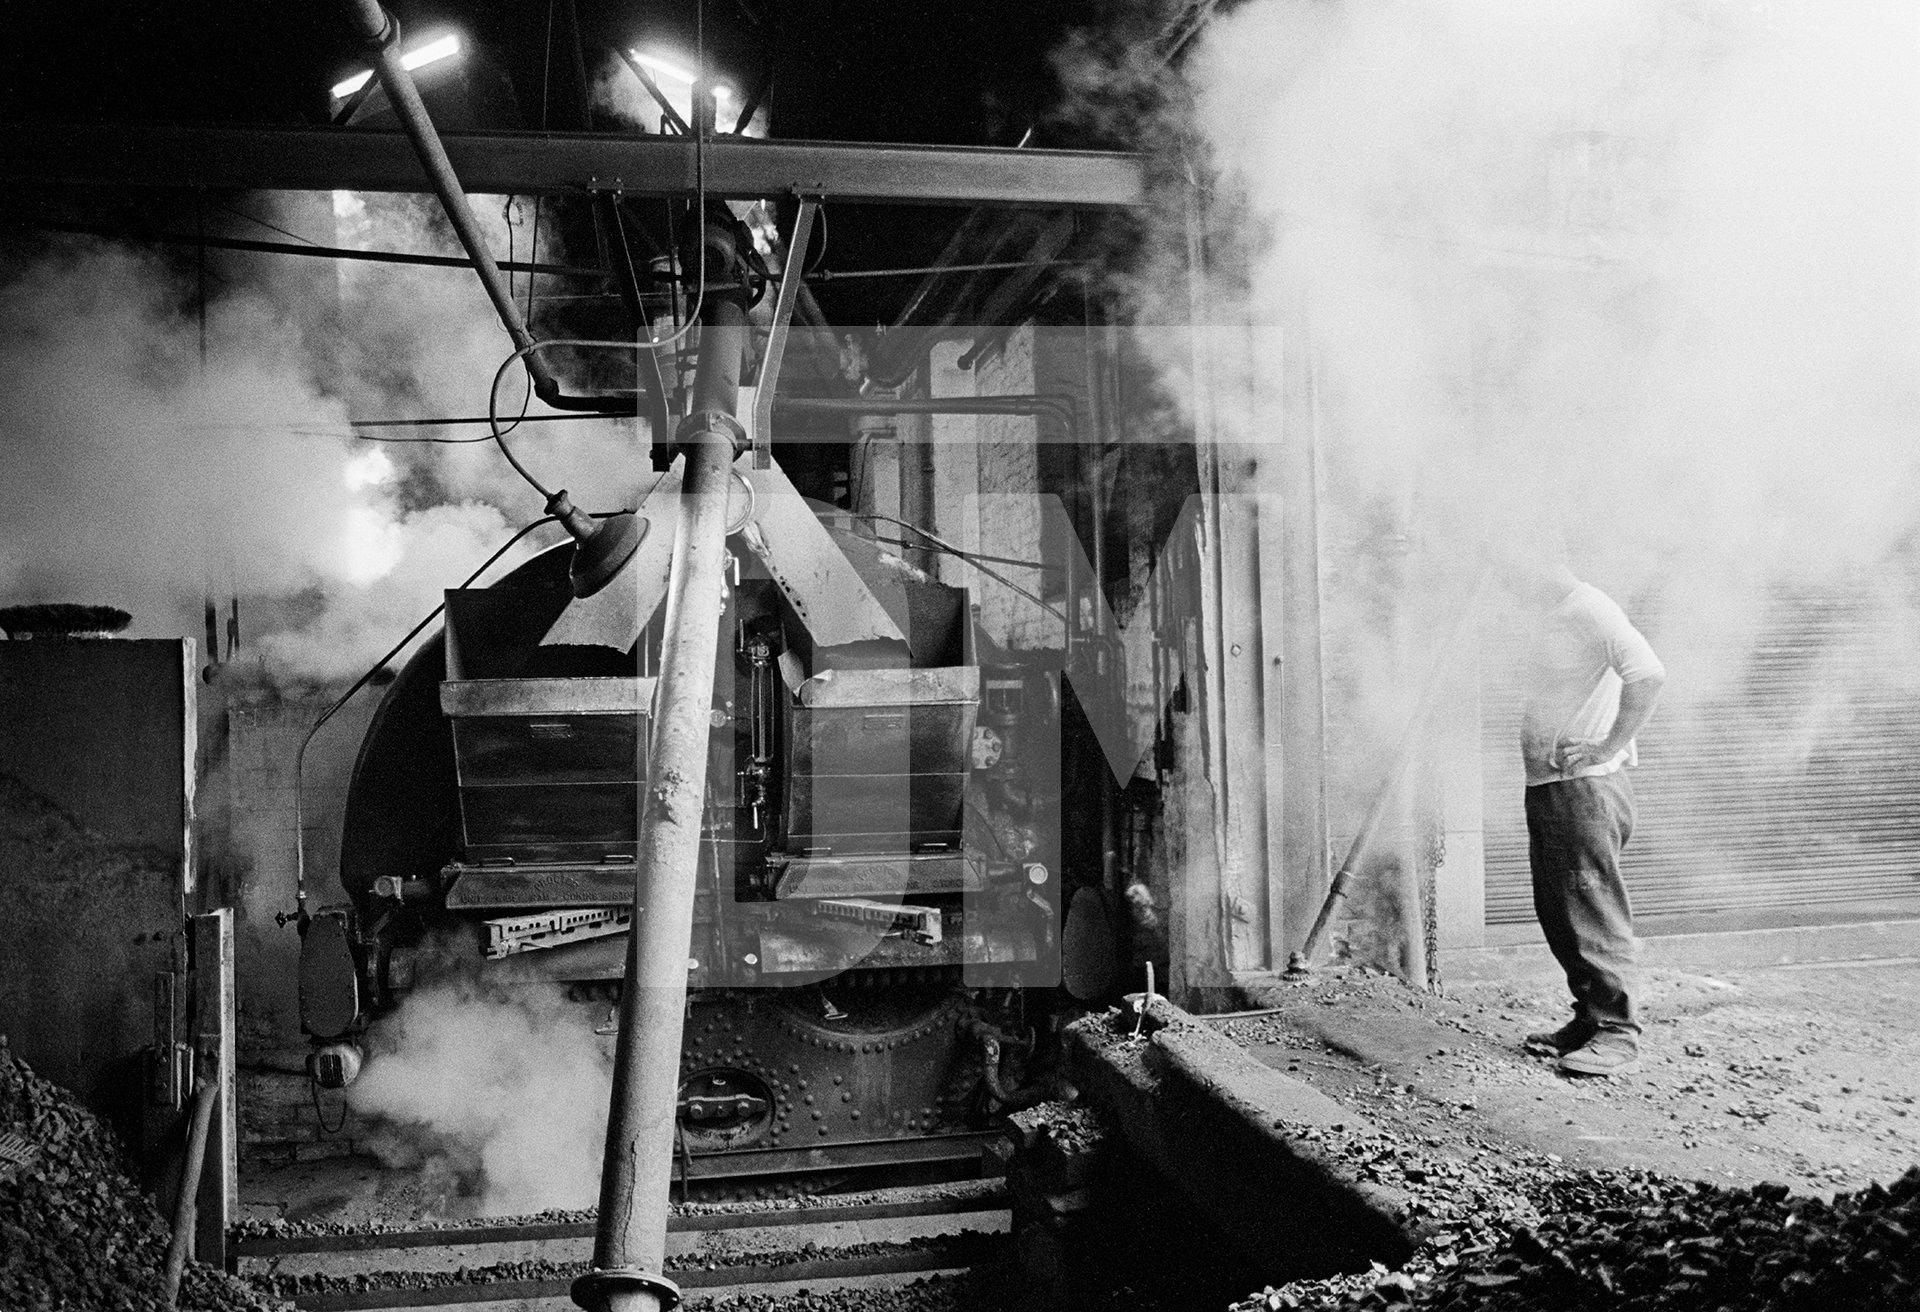 Stanley Graham, engineer, ‘blowing off’ and ‘blowing down’ the Lancashire boiler (emptying it) ready for fluing. Wakes holiday, July 1976 by Daniel Meadows